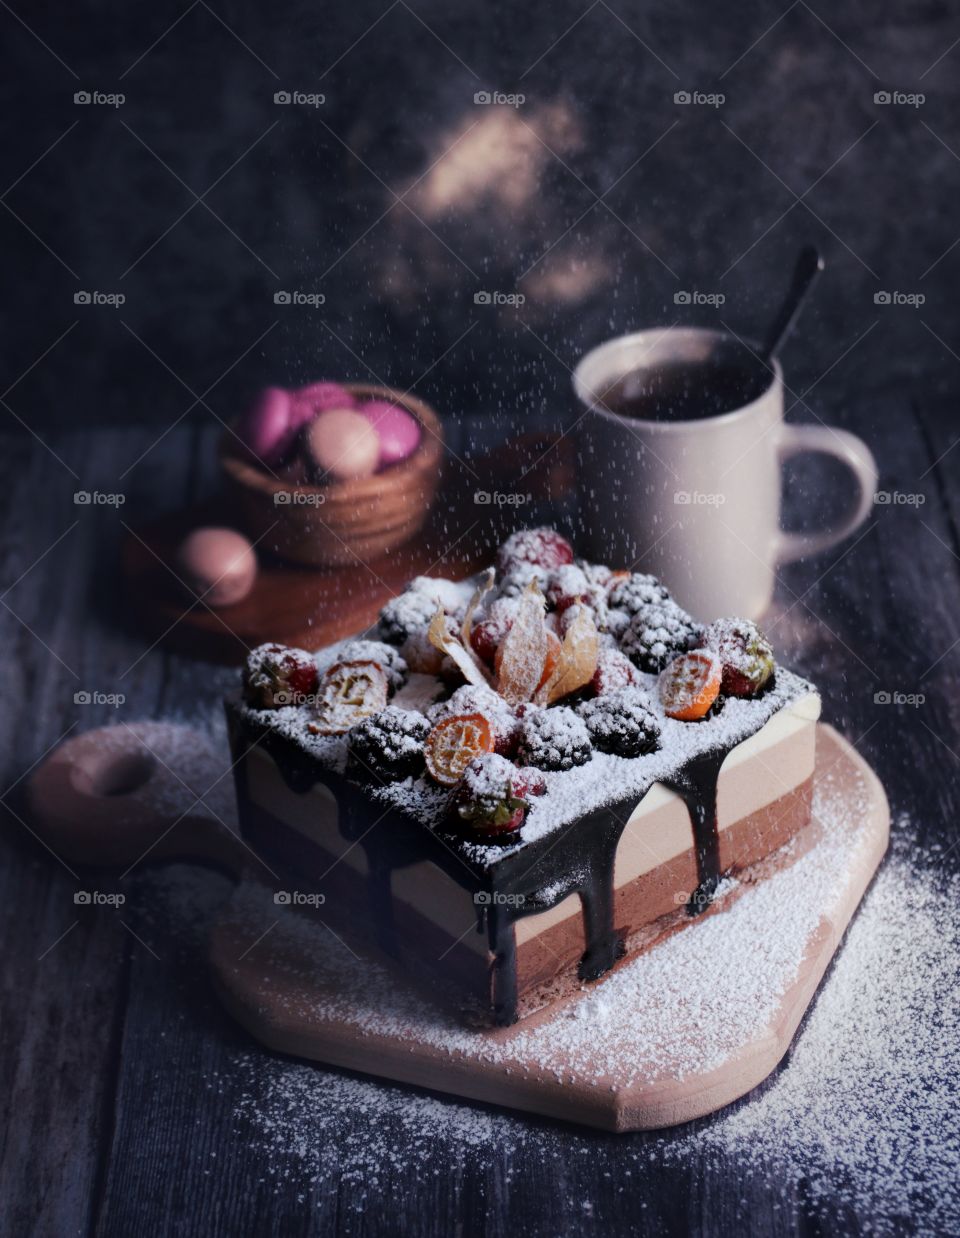 Three chocolate cake with berries and a cup of tea